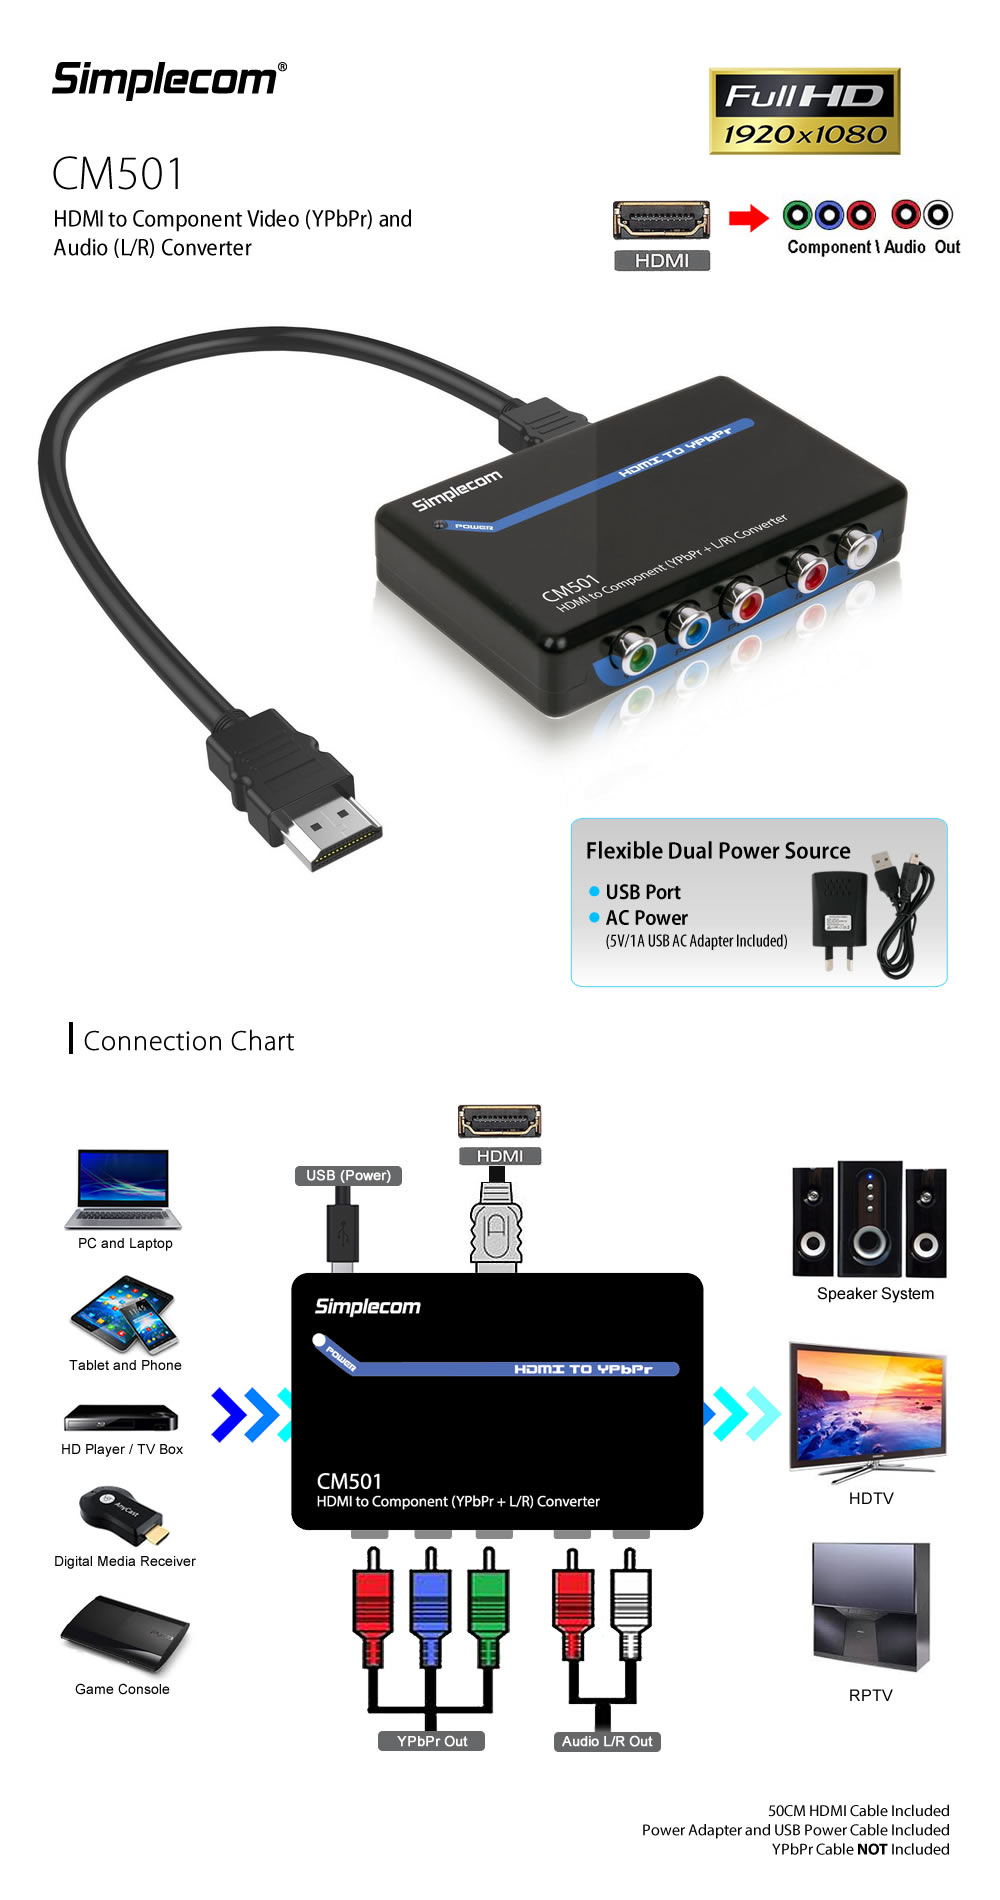 Simplecom CM501 HDMI to Component Video (YPbPr) and Audio (L/R) Converter 1